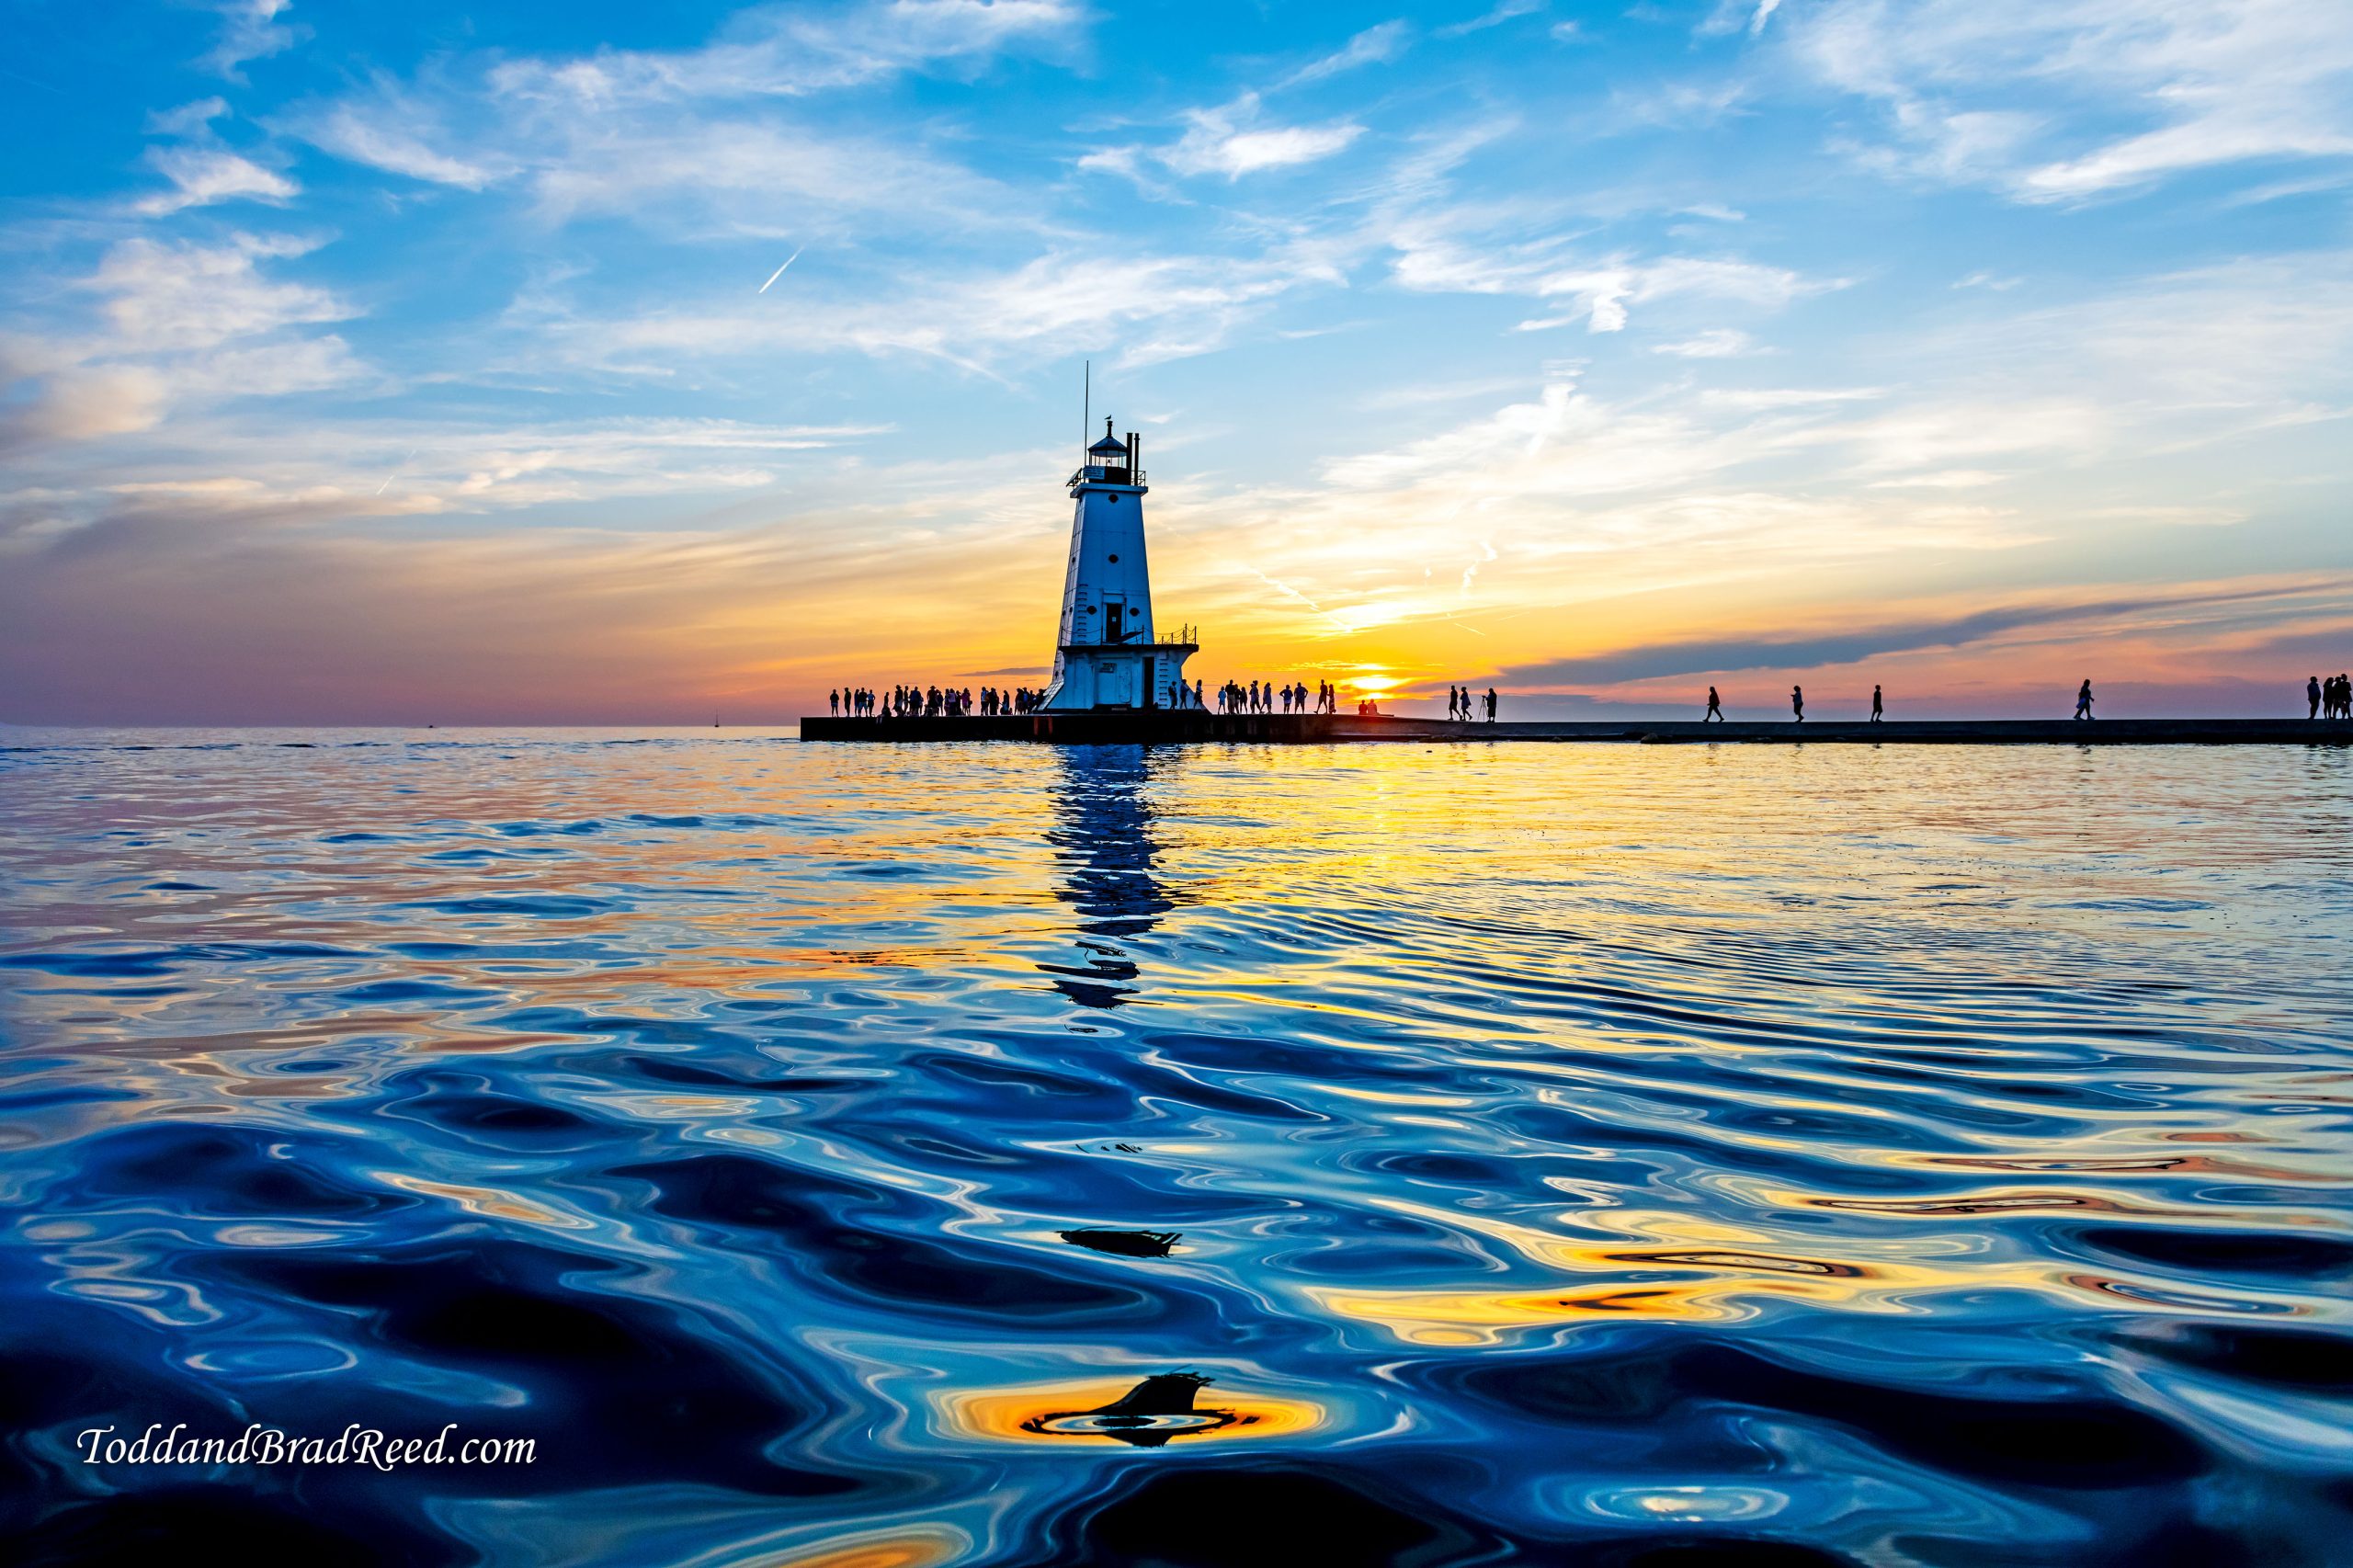 Todd Reed_5011_lighthouse and badger_7_29_2018_4256px_Watermark.jpg